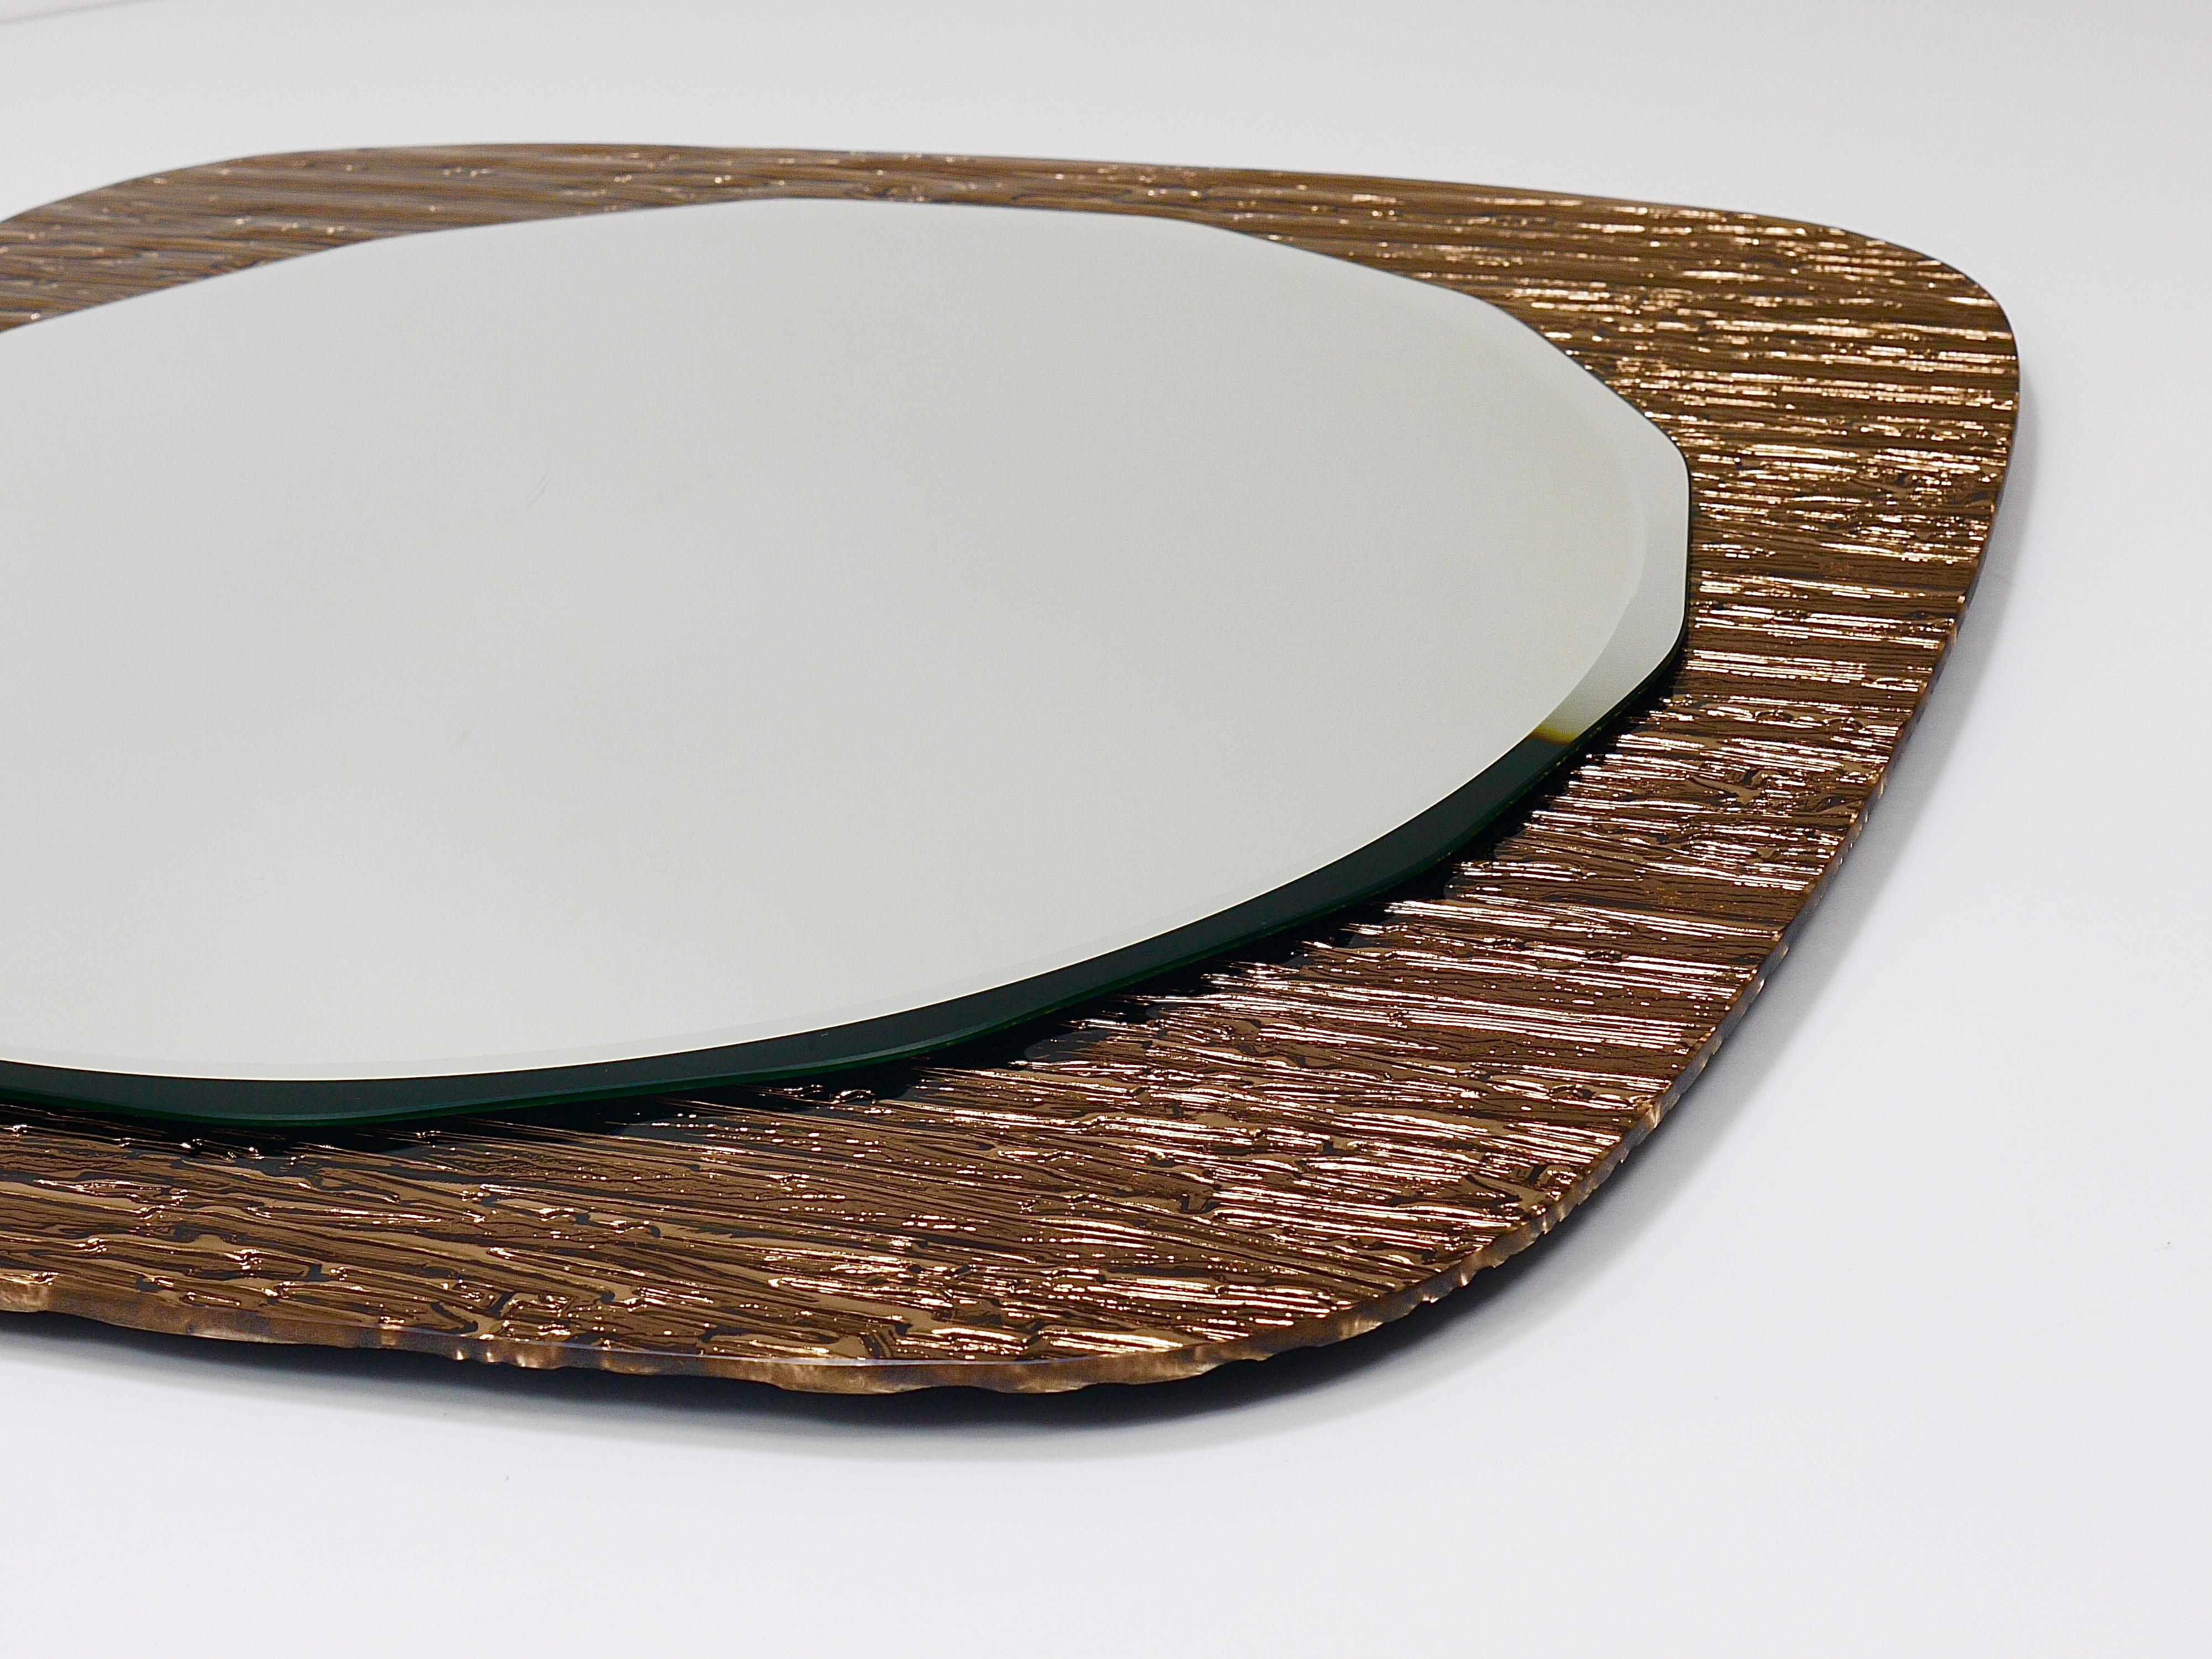 Cristal Arte Bronze Gold Scalloped Textured Midcentury Wall Mirror, Italy, 1960s For Sale 10